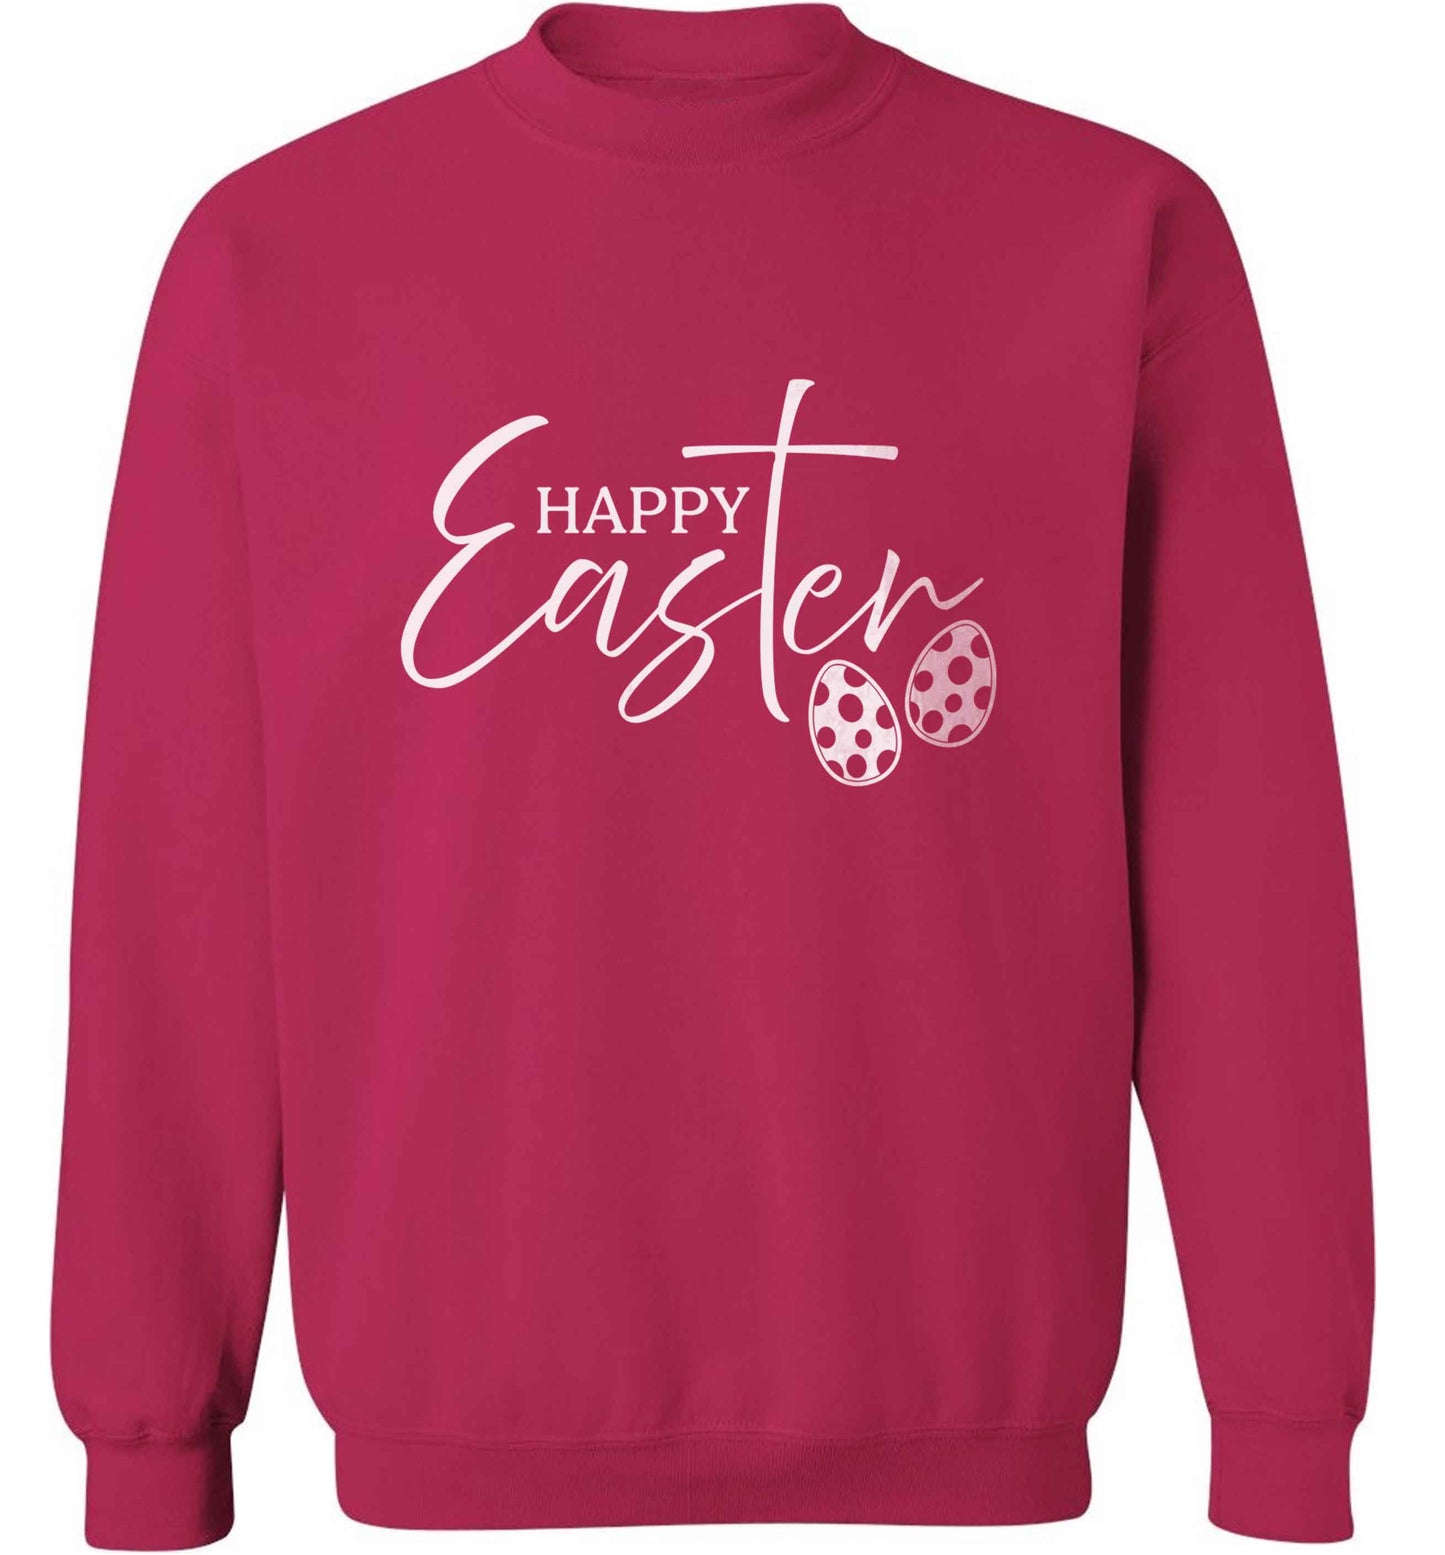 Happy Easter adult's unisex pink sweater 2XL